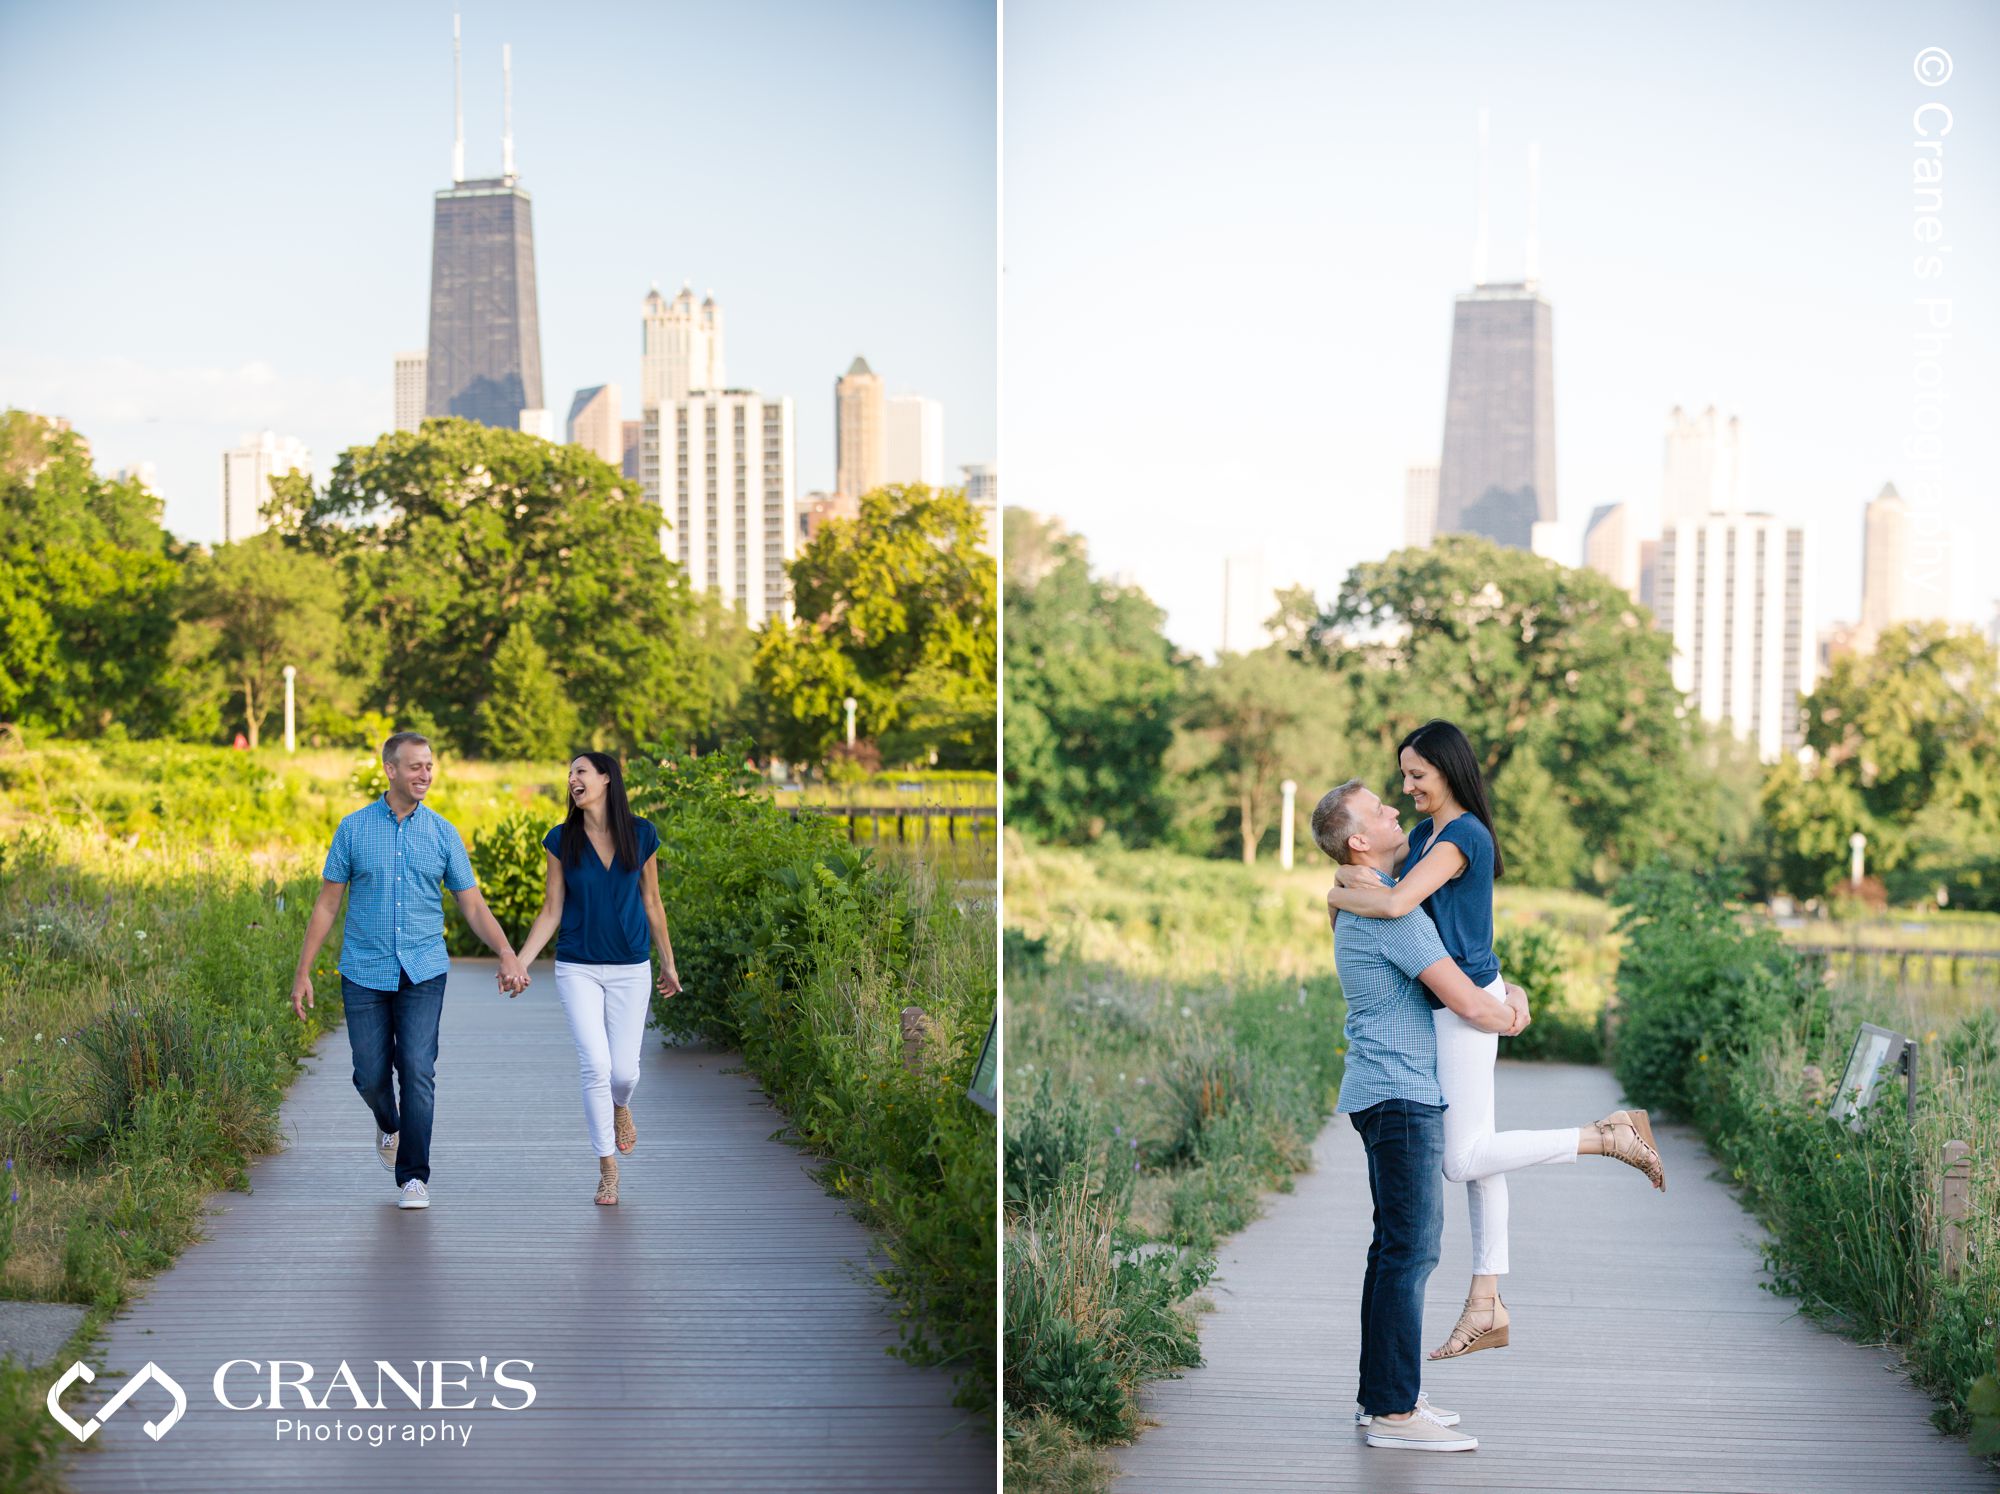 An engagement summer session at Lincoln Park near downtown Chicago.